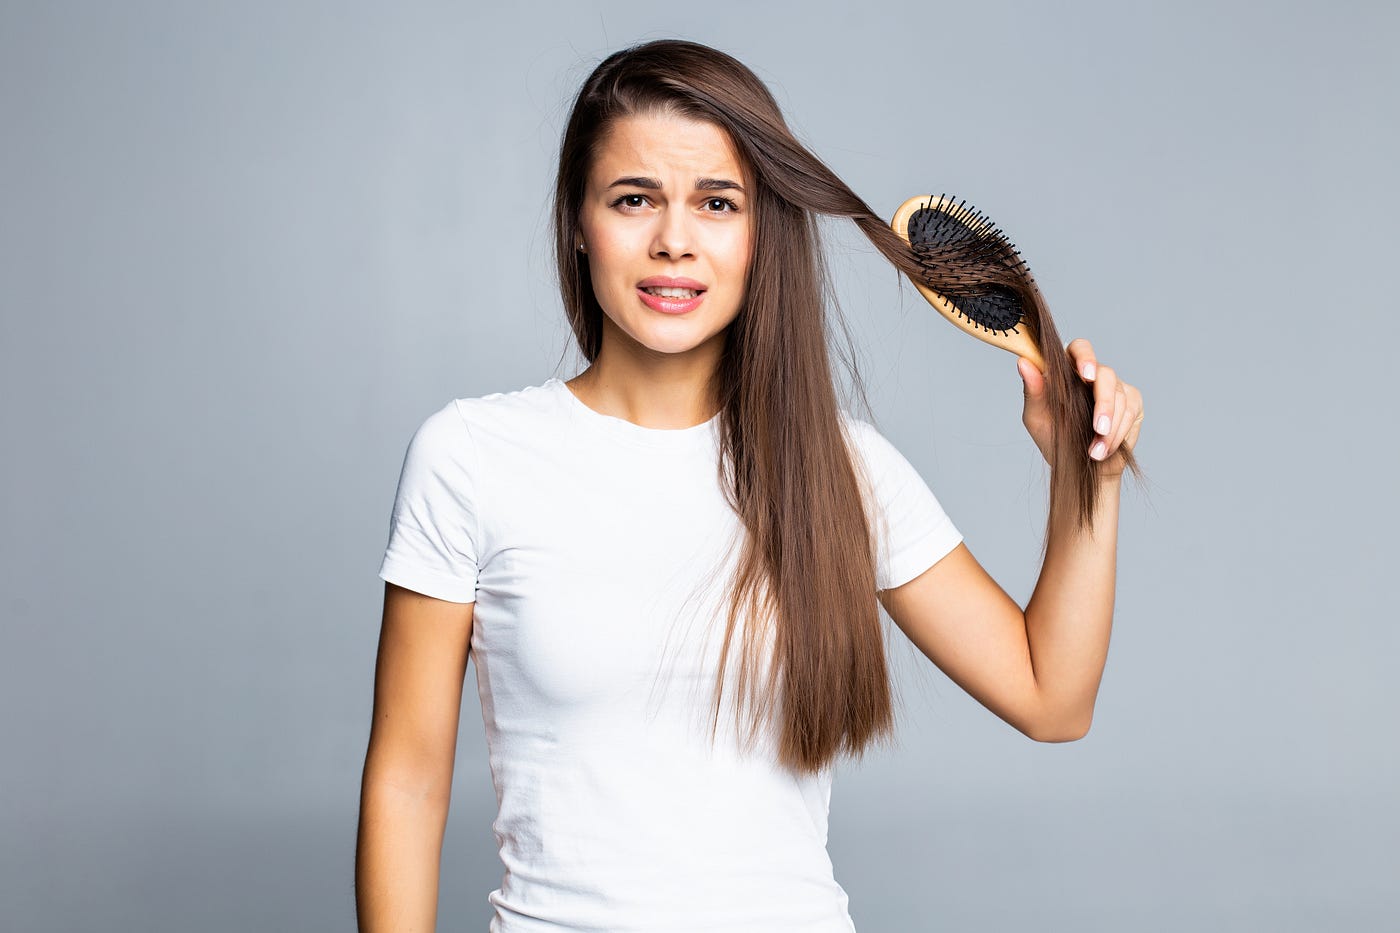 Say Goodbye To Frizzy Hair With These Game-changing Tips!